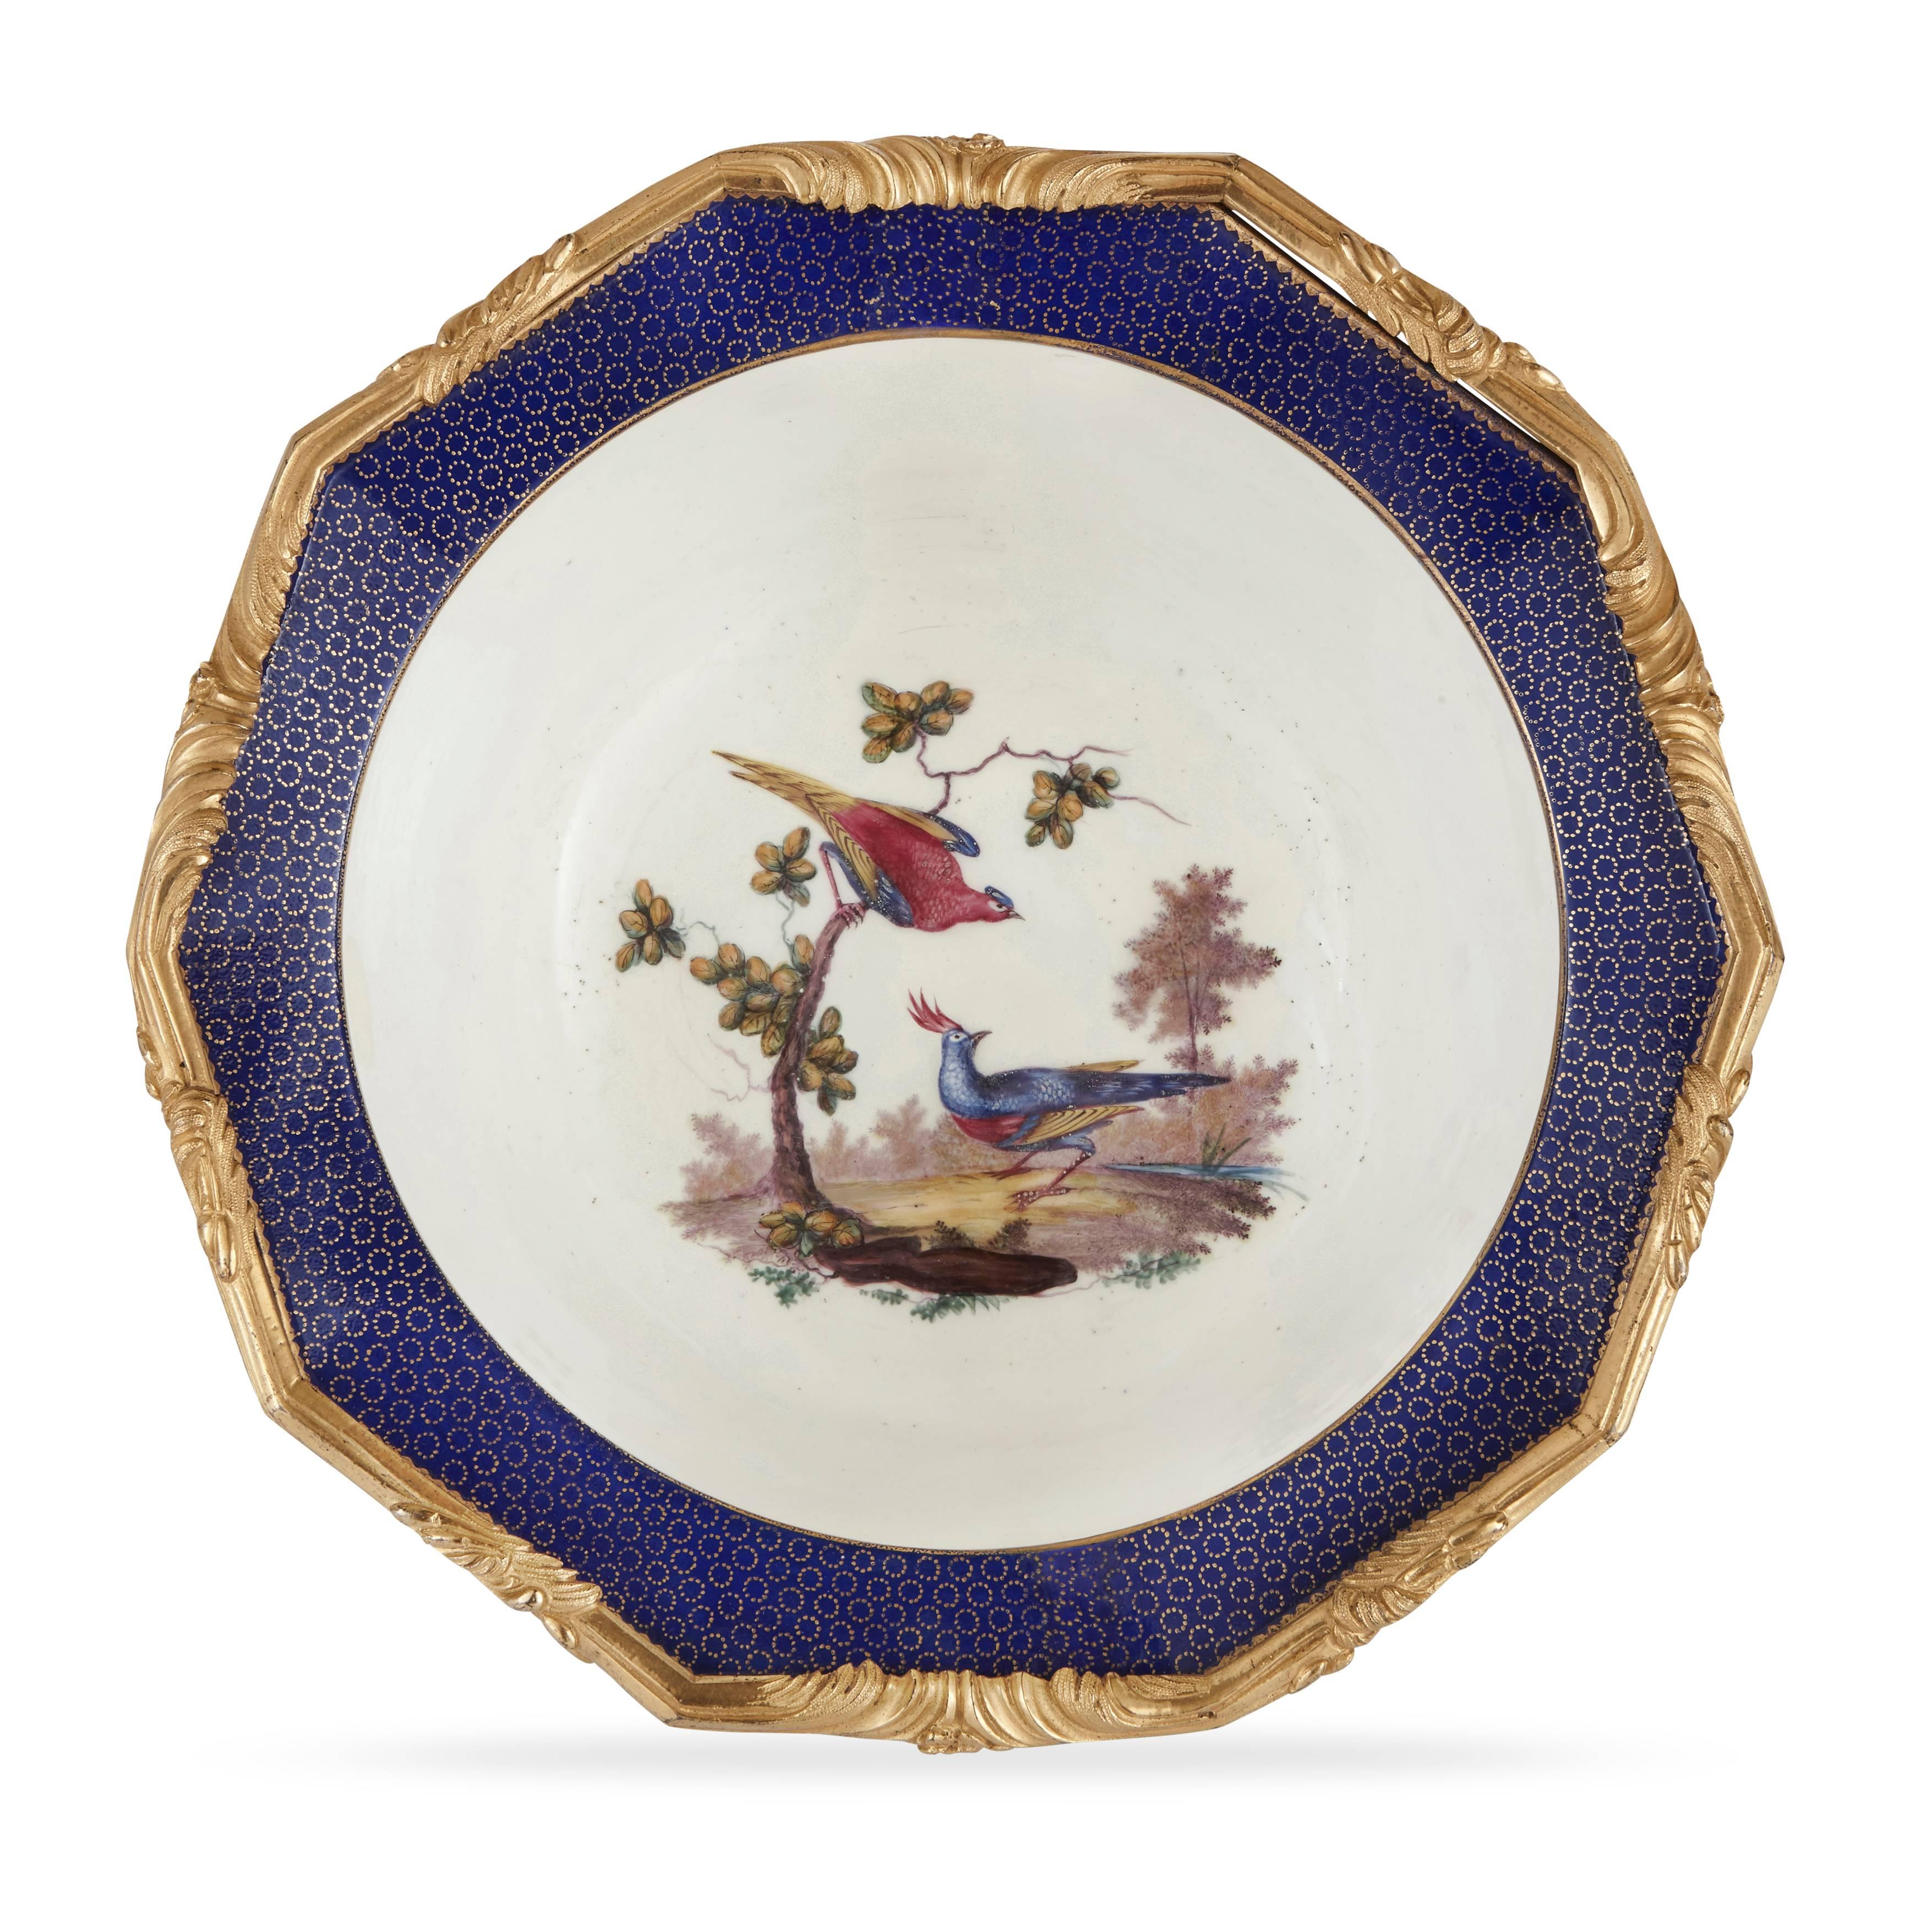 French Pair of Ormolu-Mounted Sèvres Porcelain Jardinieres